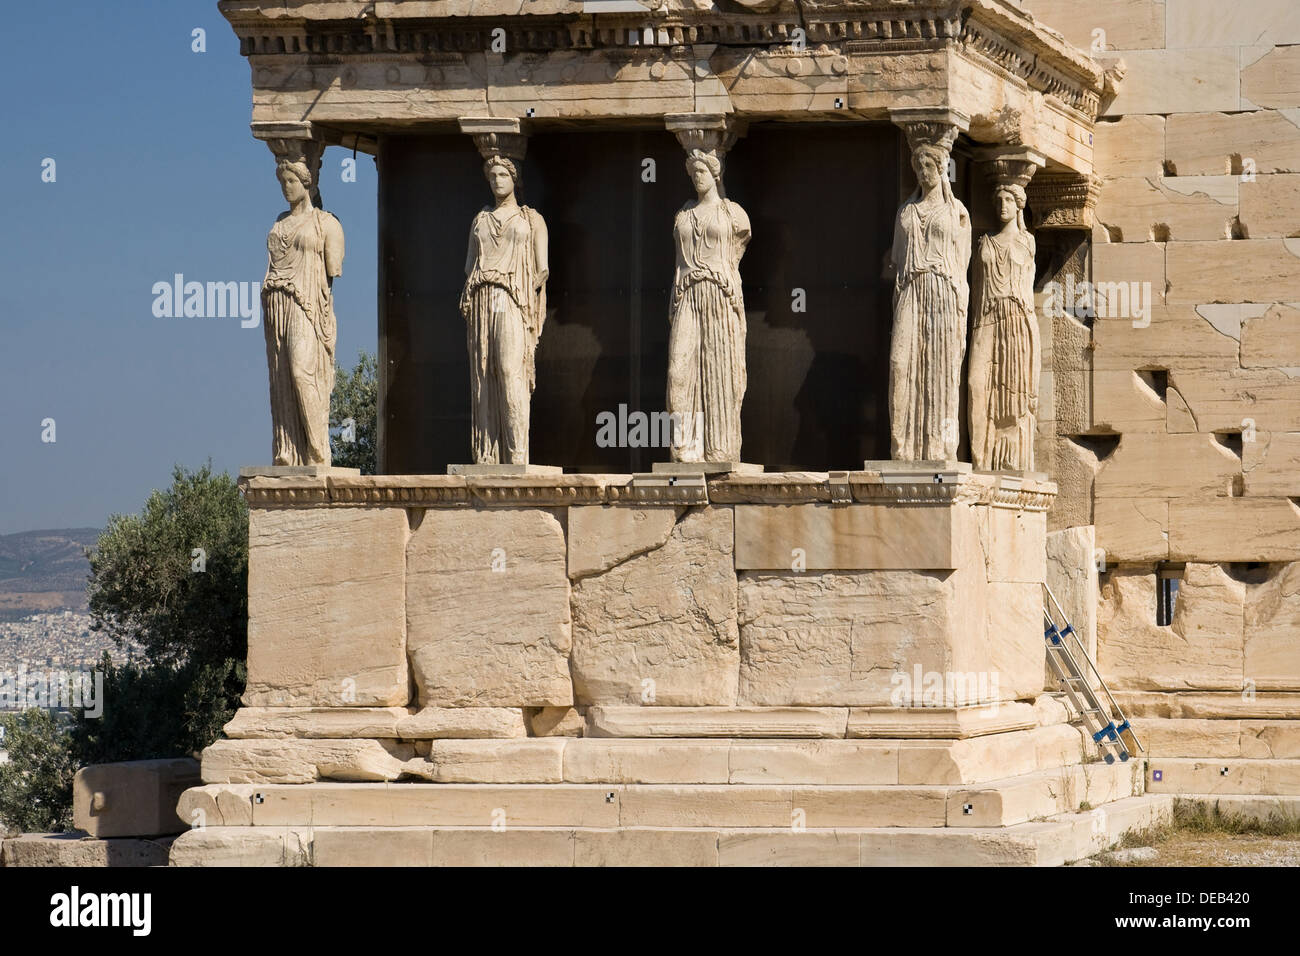 Porch of the Caryatids of the Erechthion temple at Acropolis, Athens, Greece. Stock Photo